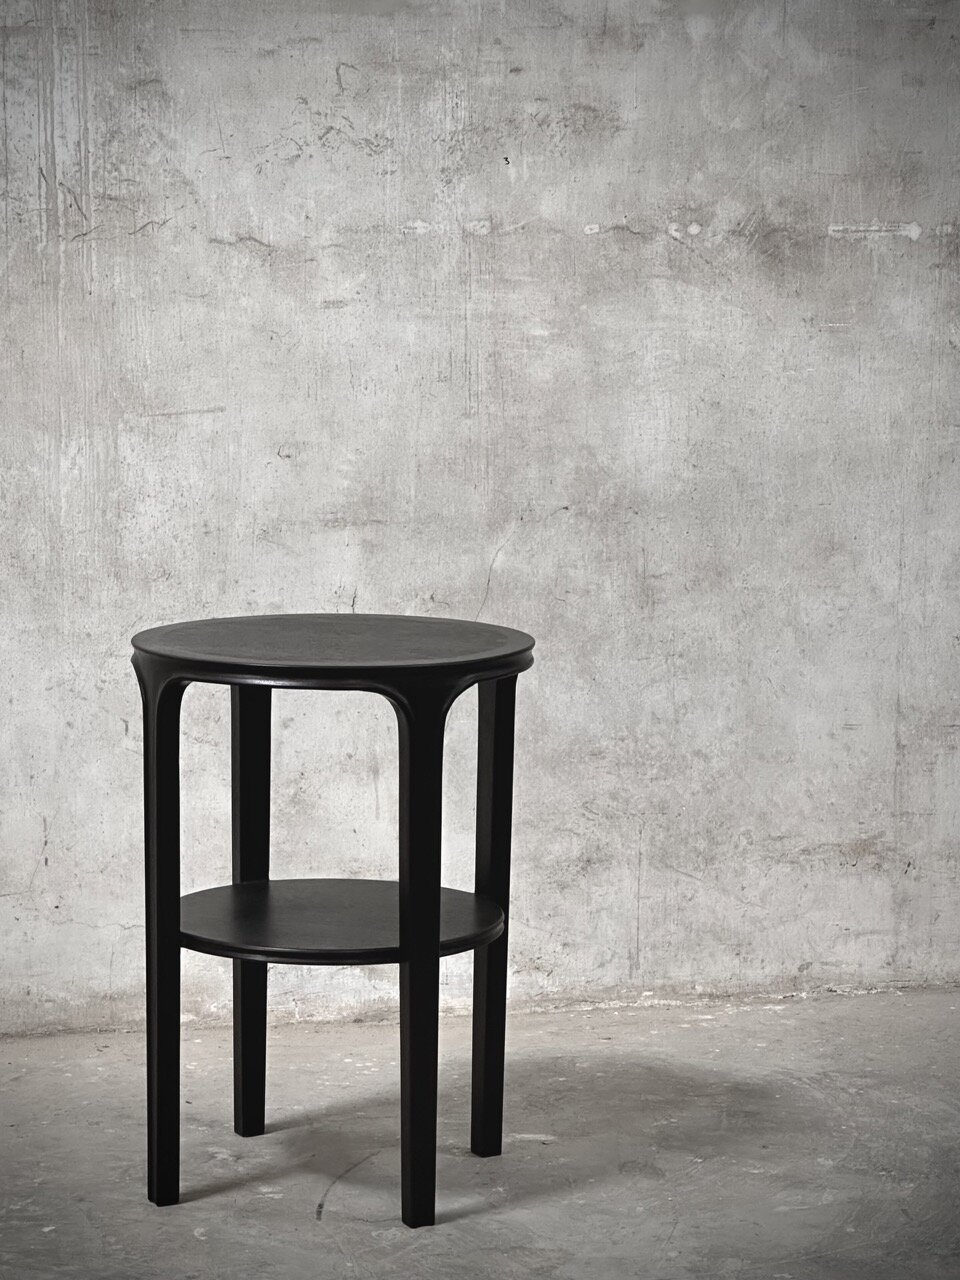 COX round small table, black stain